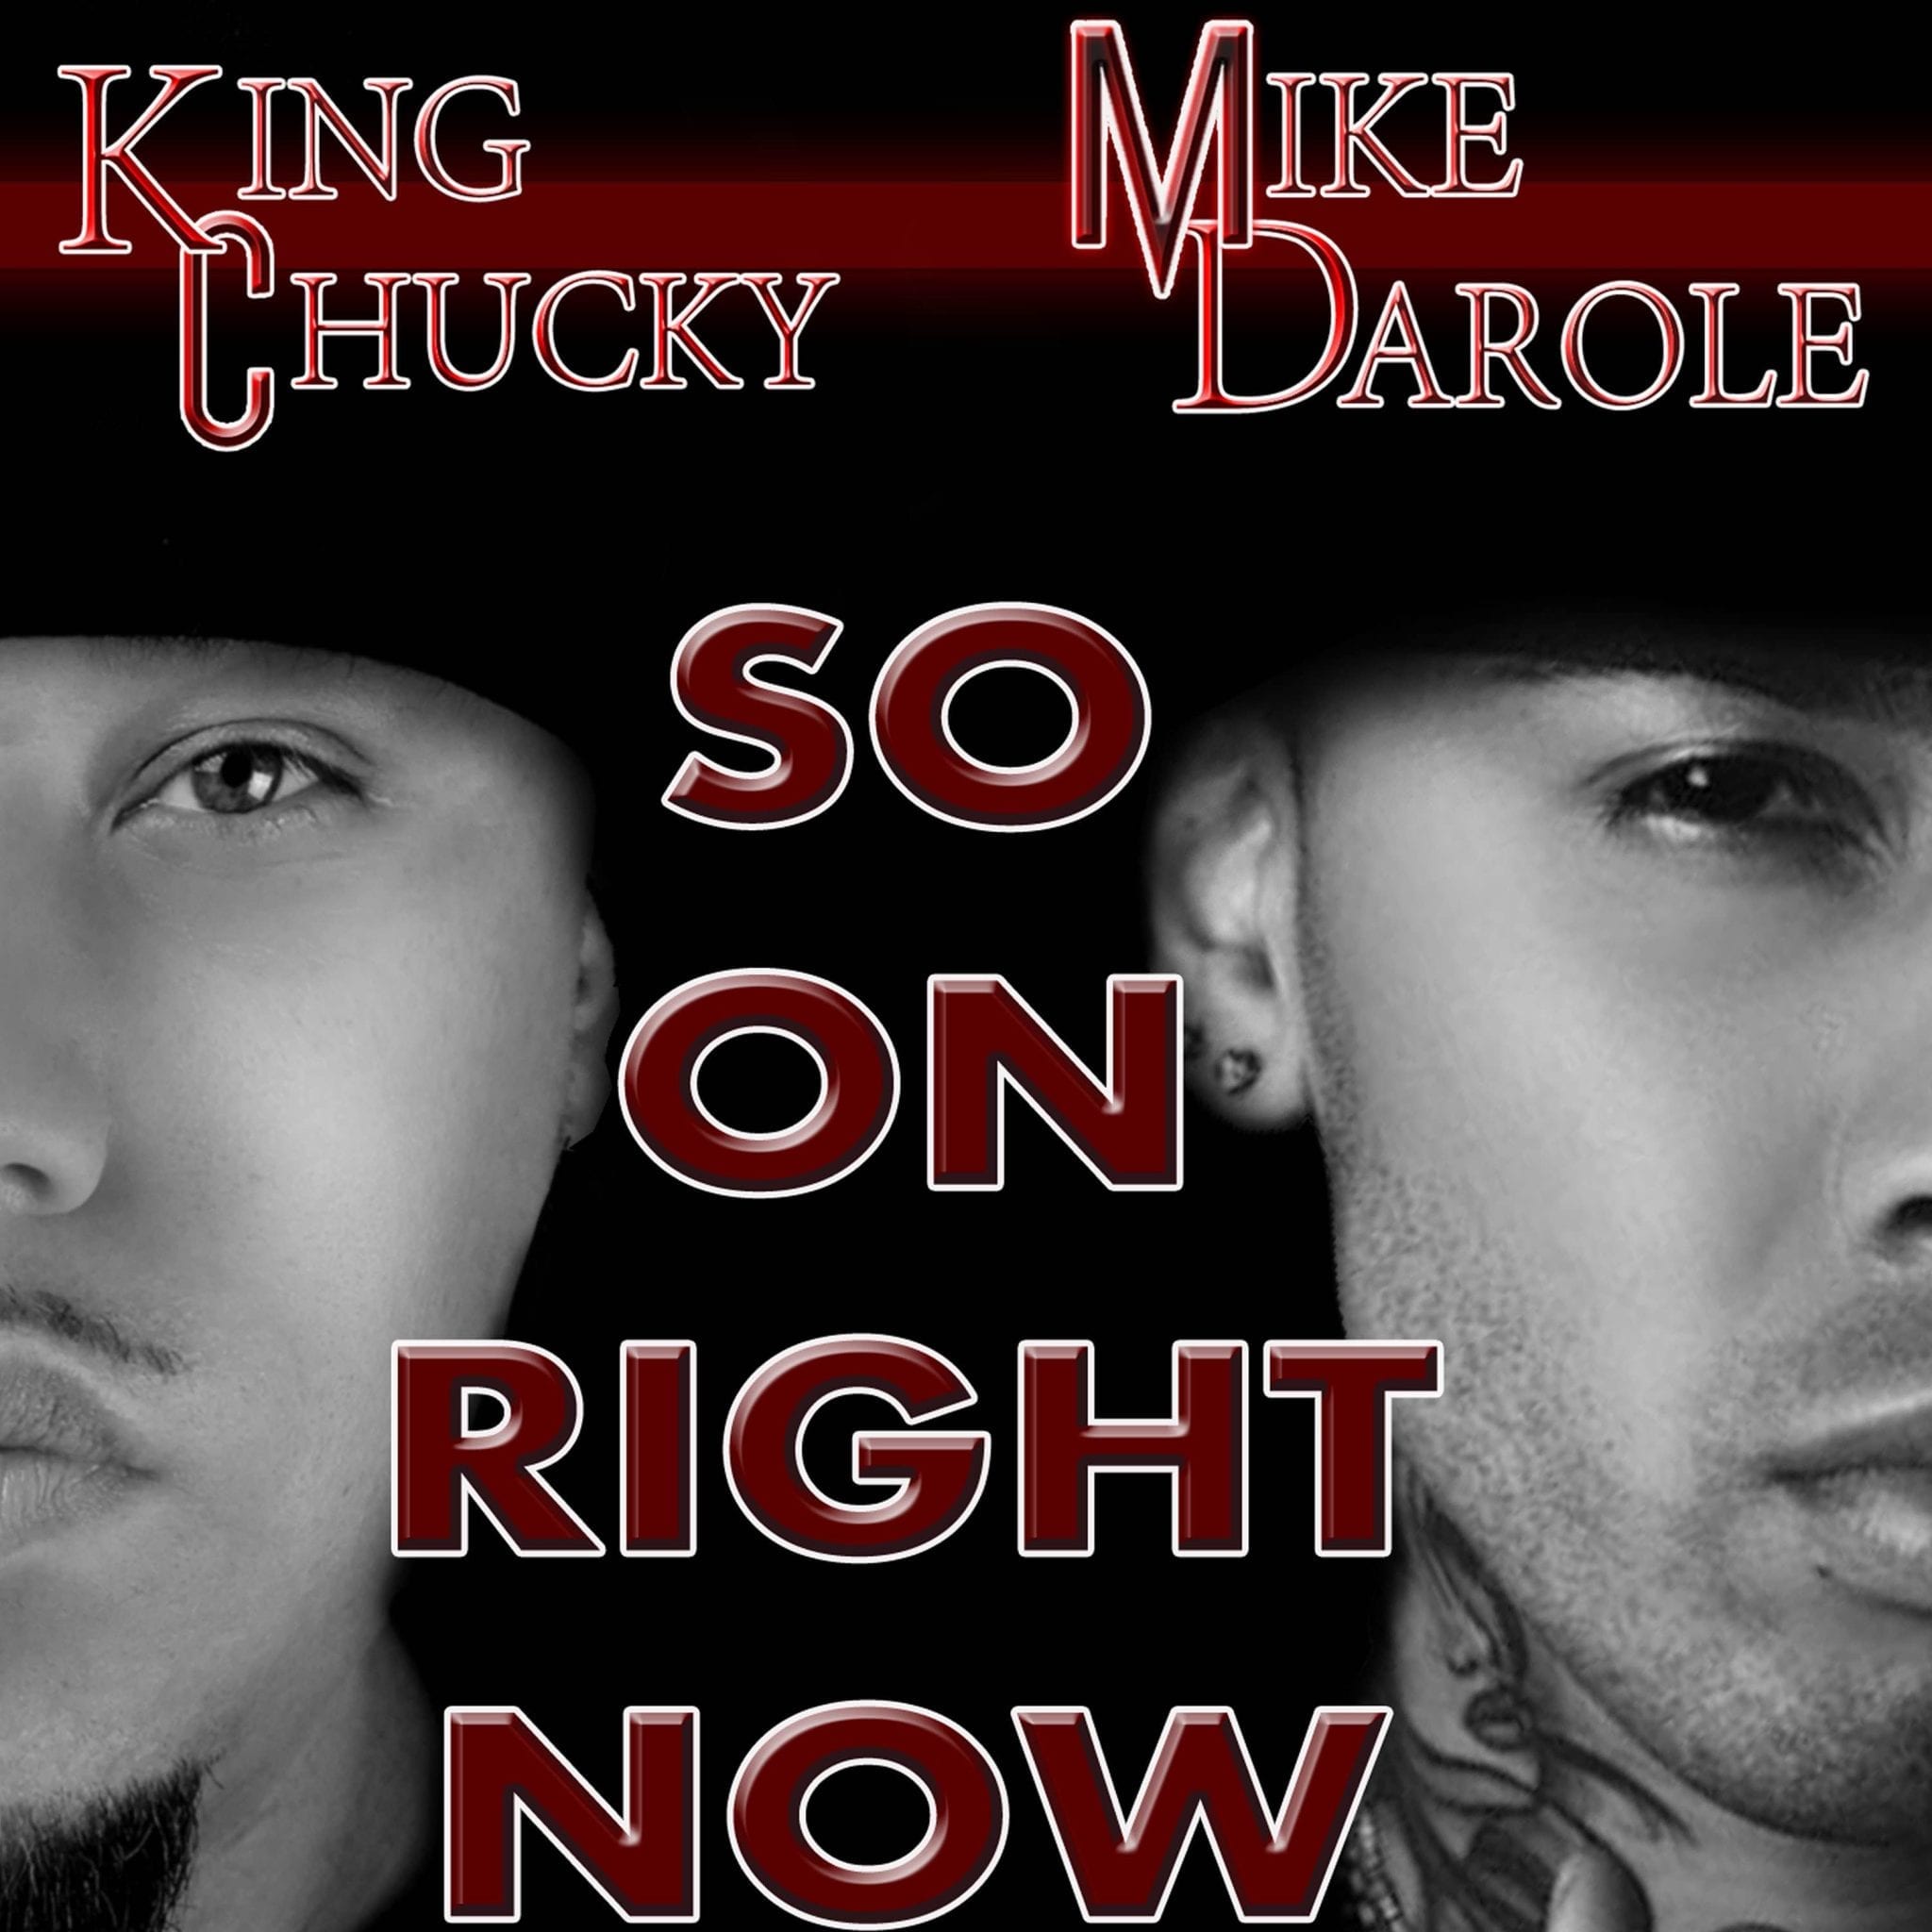 King Chucky - So On Right Now Ft. Mike Darole